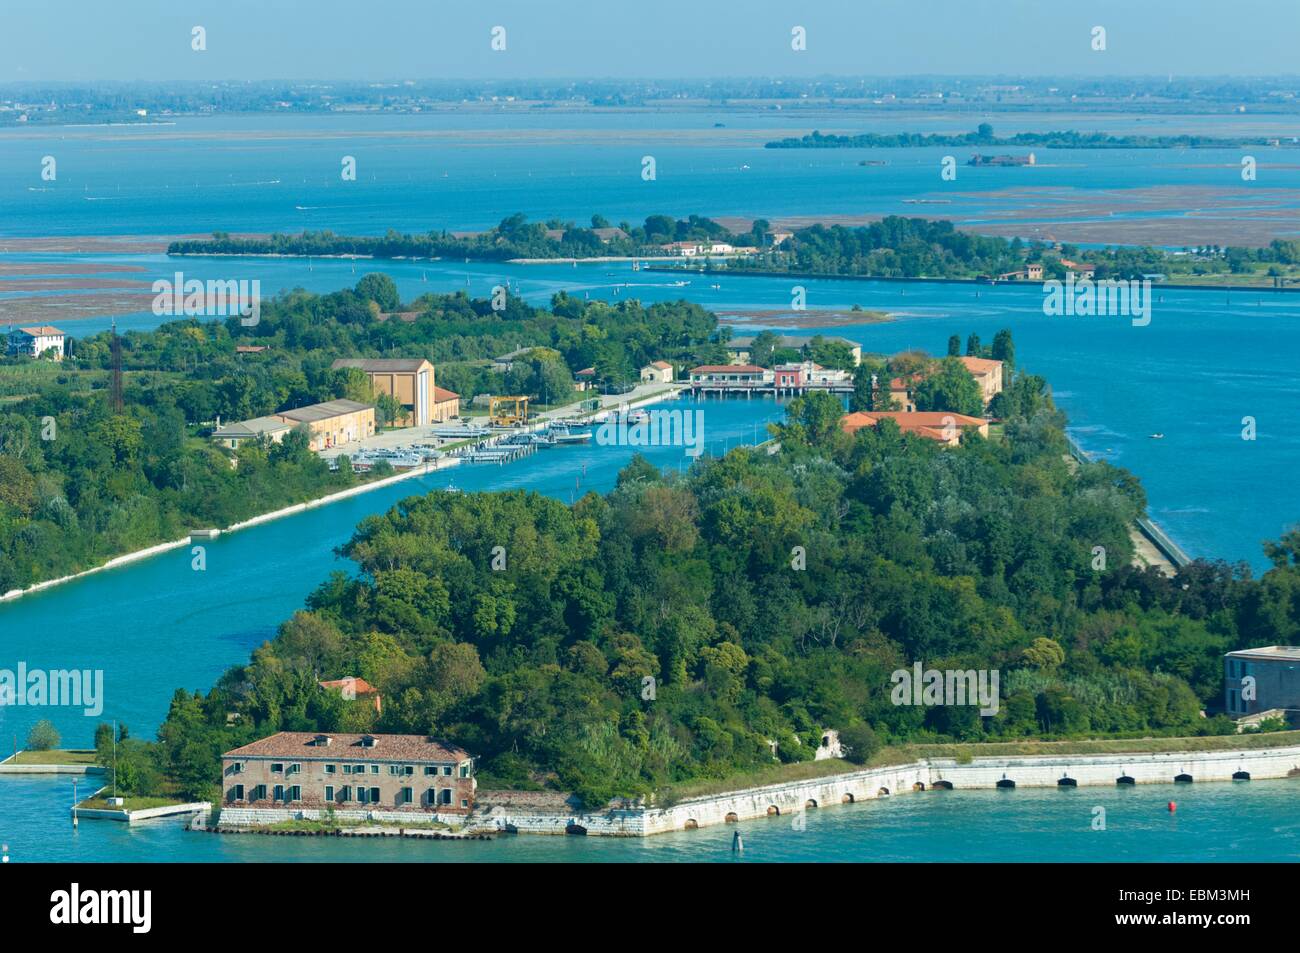 Aerial view of Le Vignole and isola di Sant'Andrea islands,  Venice lagoon, Italy, Europe Stock Photo